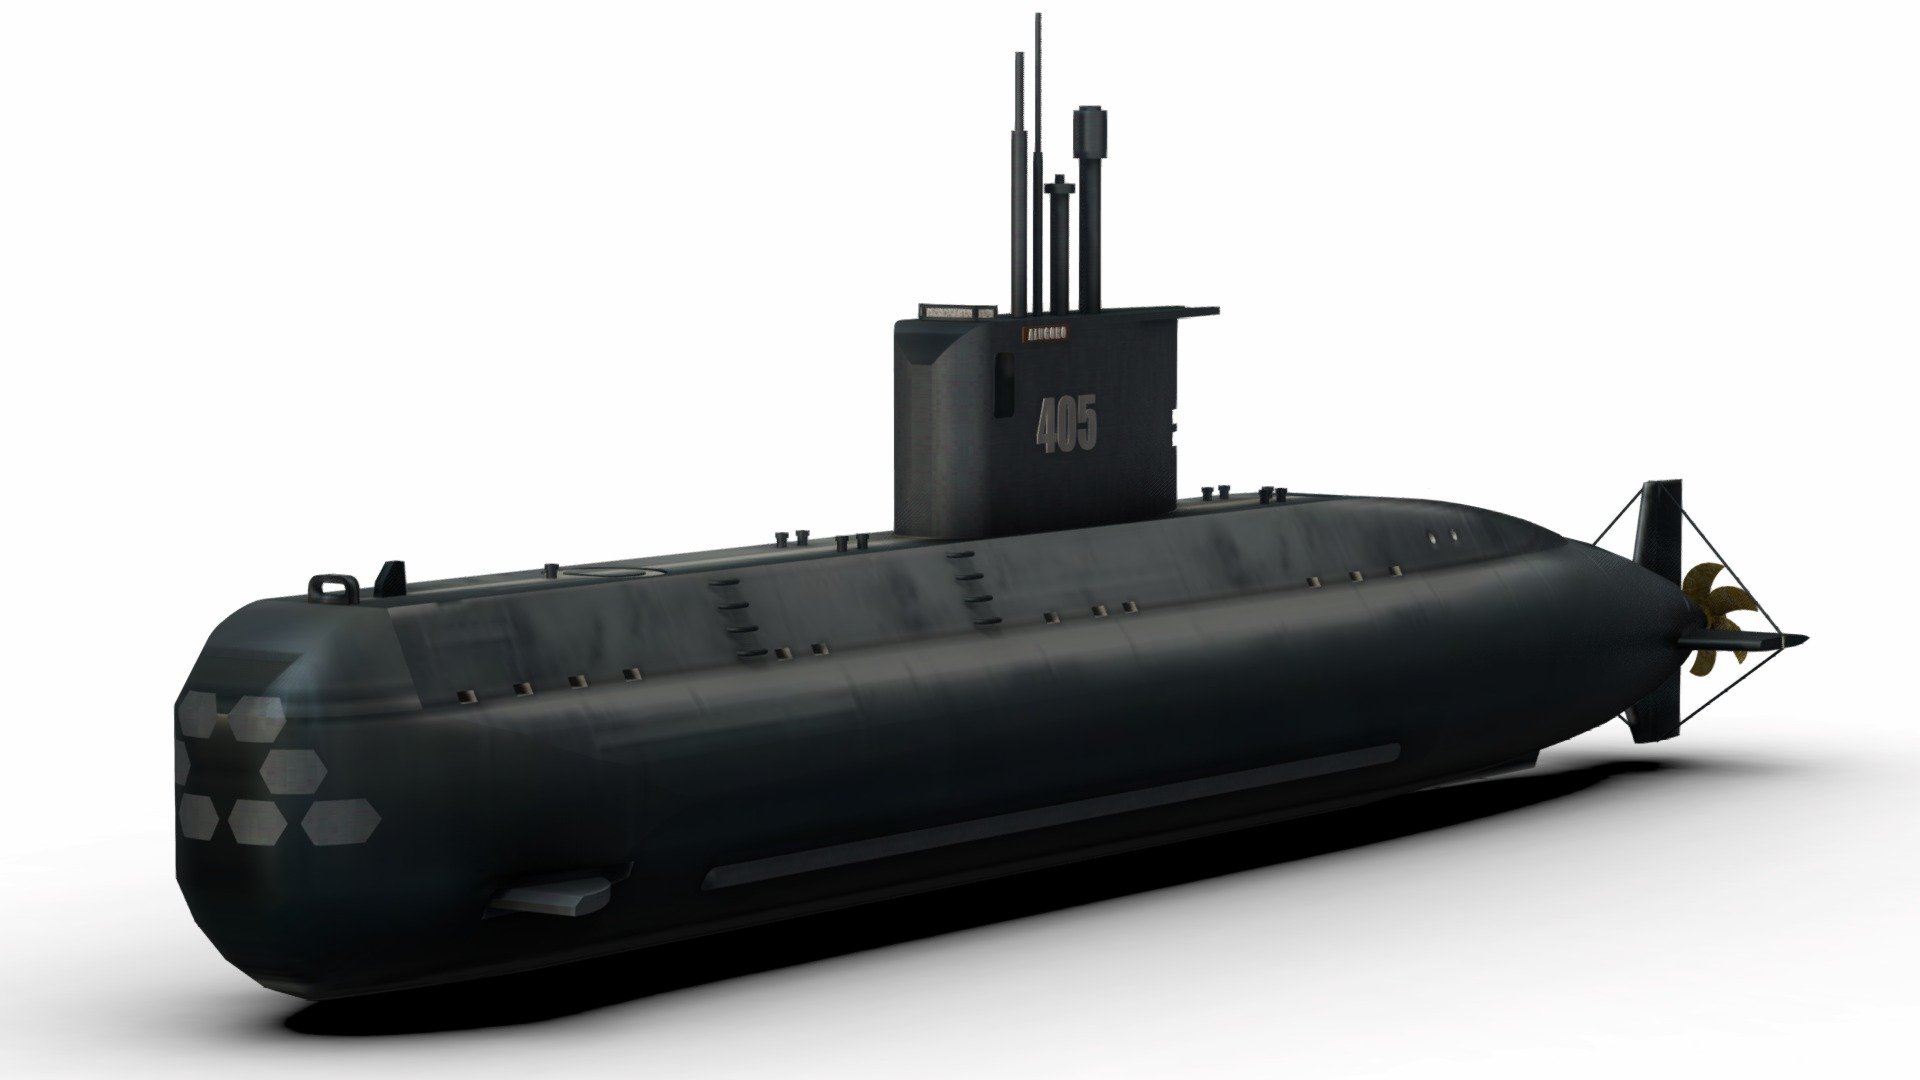 KRI Alugoro (405) is a submarine of the Indonesian Navy. She is part of the improved Chang Bogo class, also known as the Nagapasa class. The vessel was assembled by PT PAL and was launched in April 2019. She is the first submarine to be assembled in Indonesia 3d model